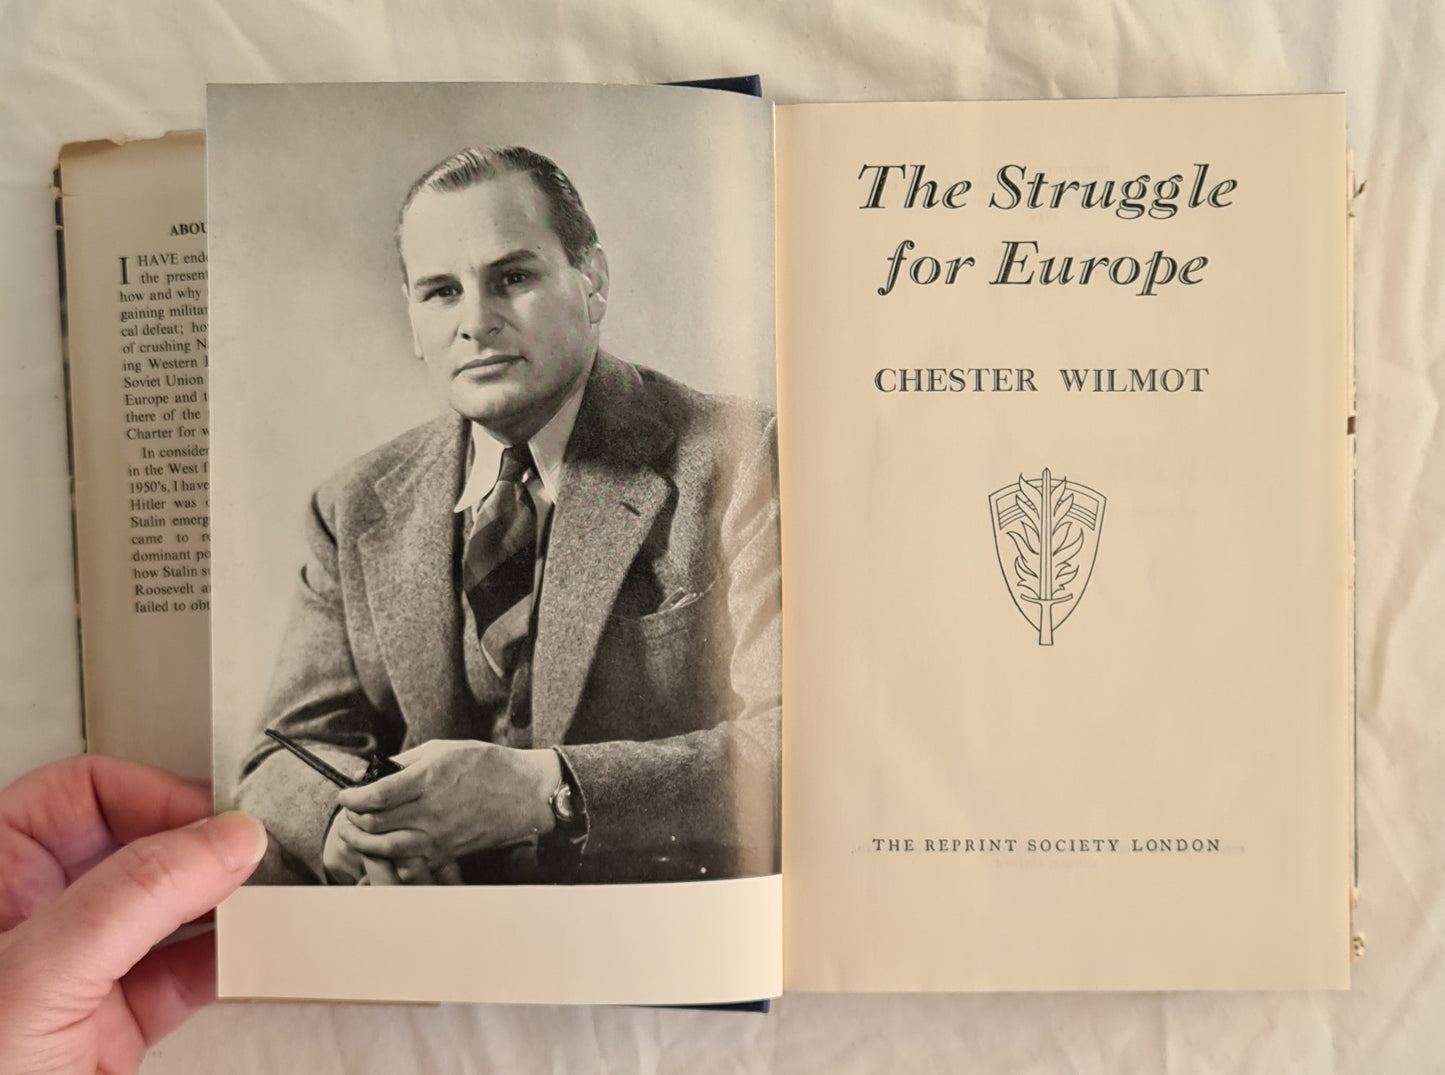 The Struggle for Europe by Chester Wilmot